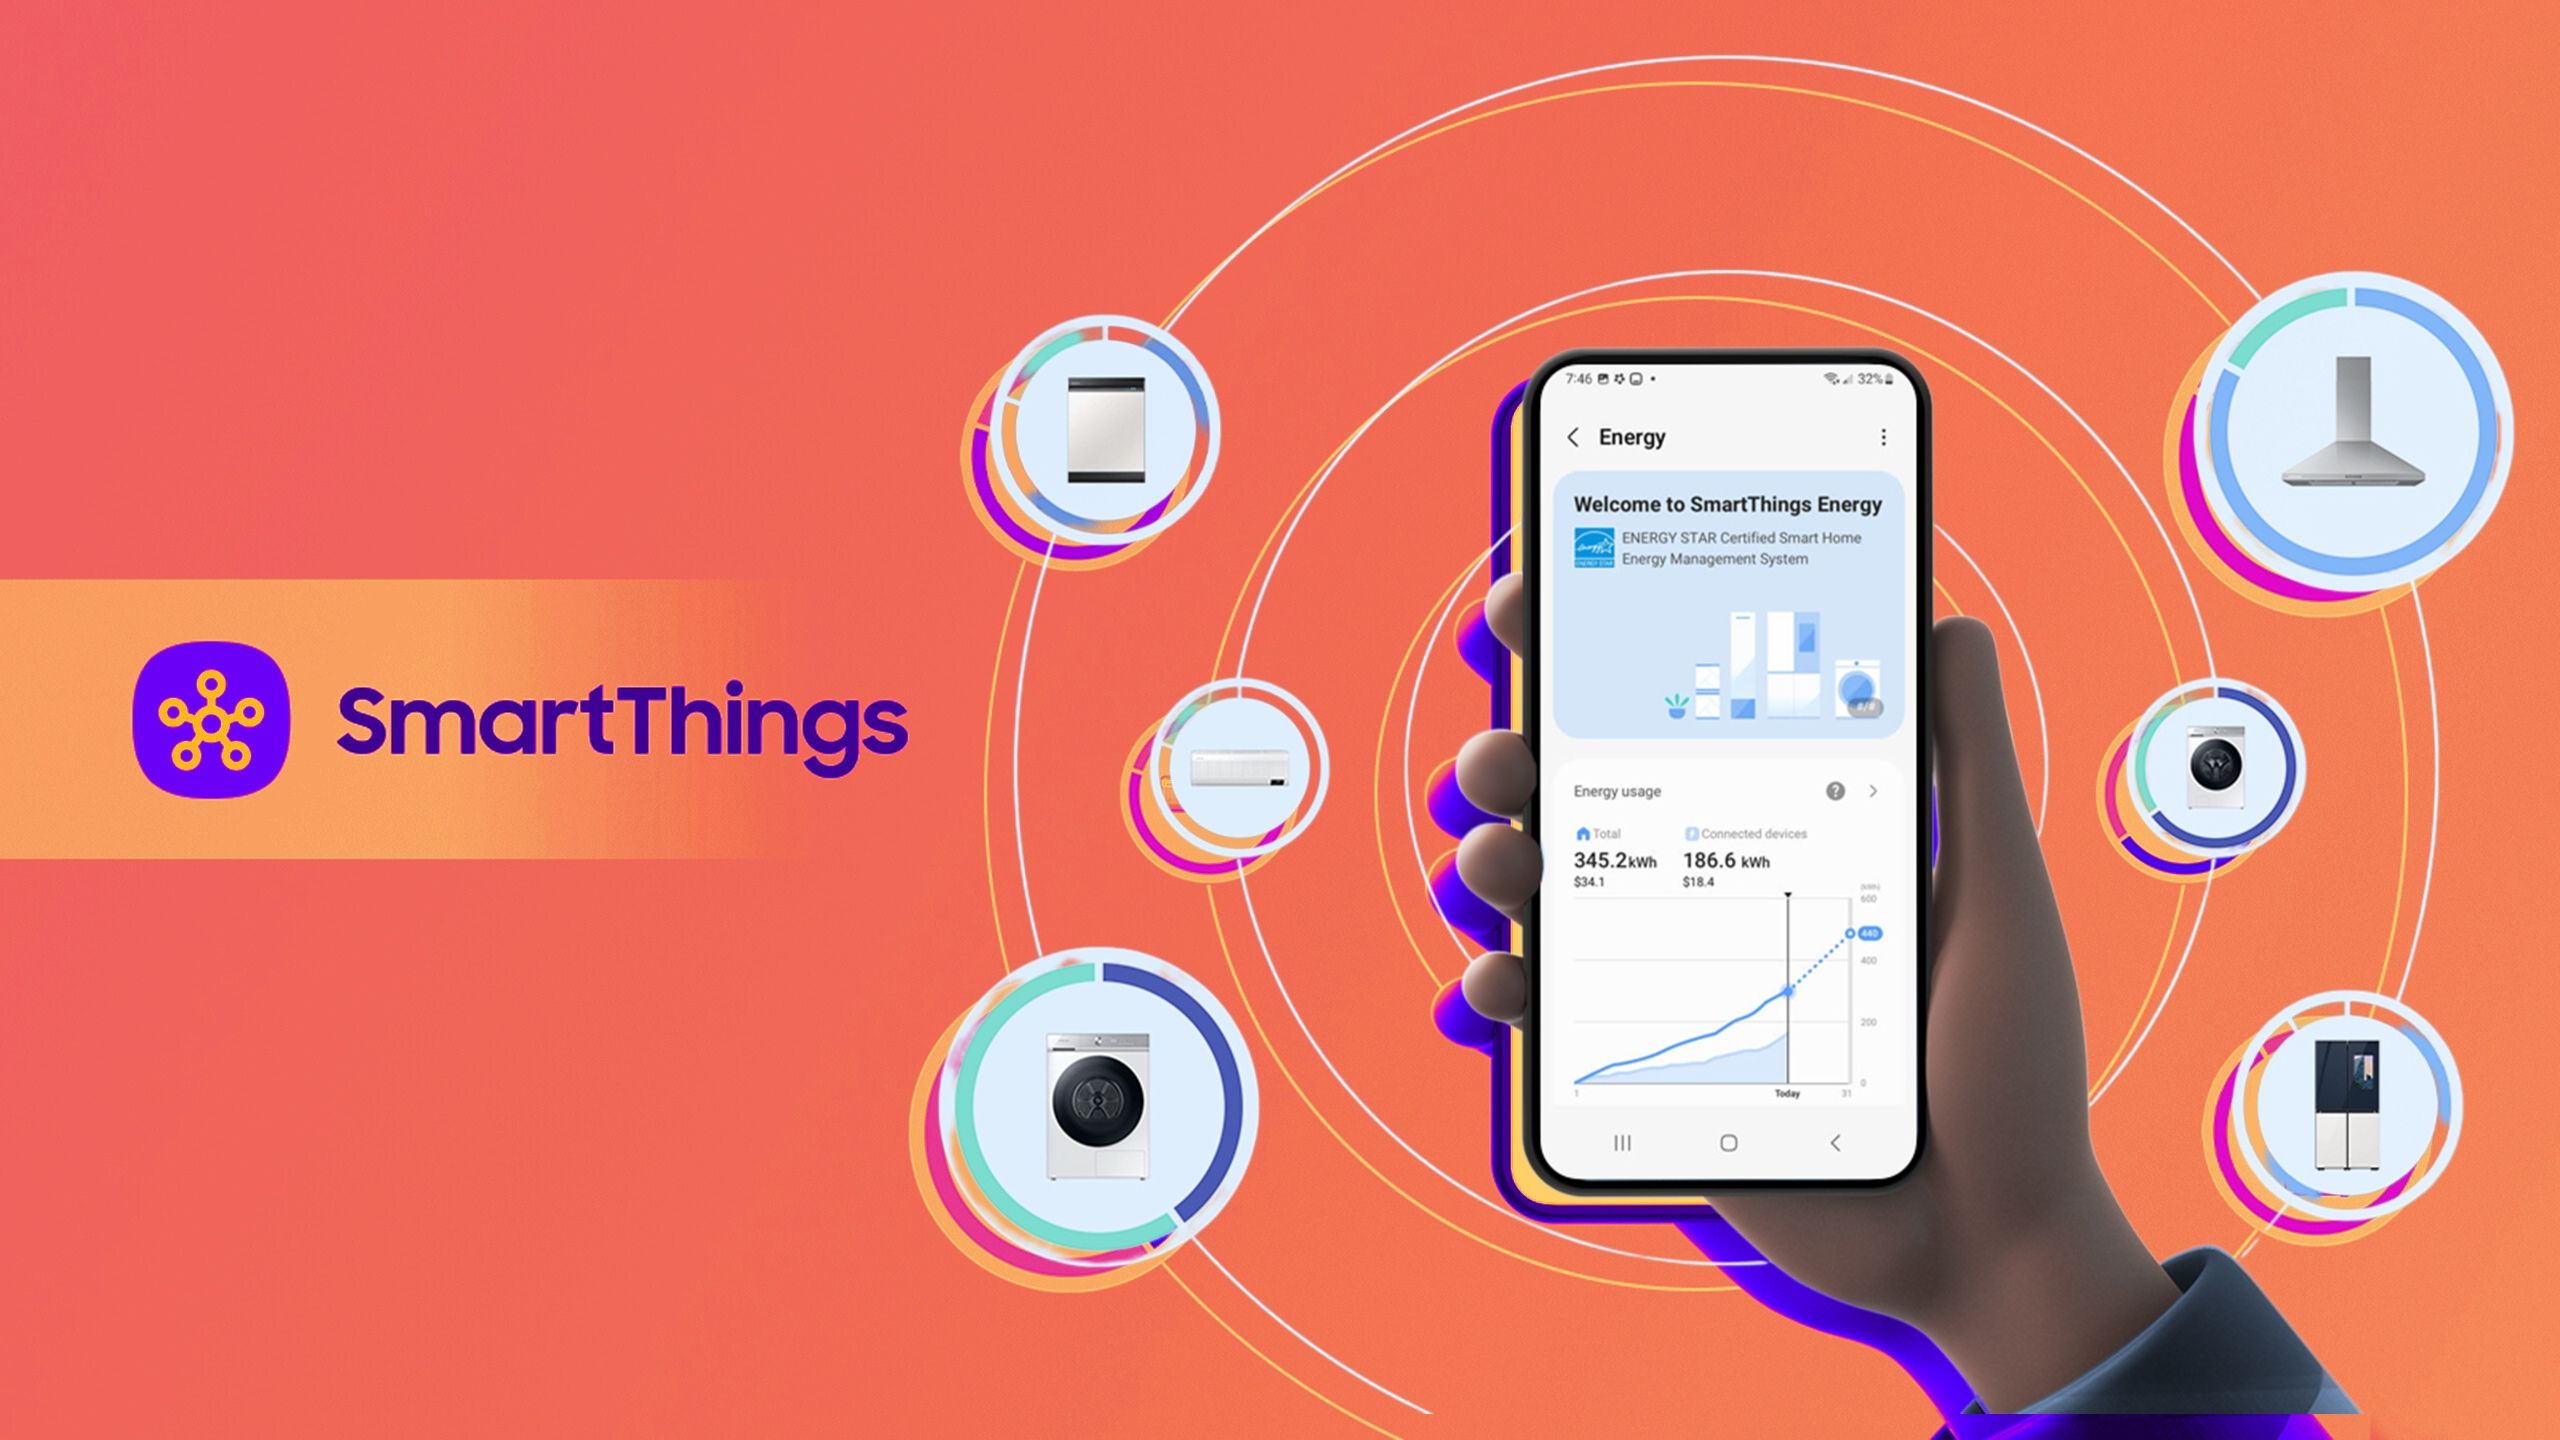 Samsung SmartThings Energy app on phone against colored background